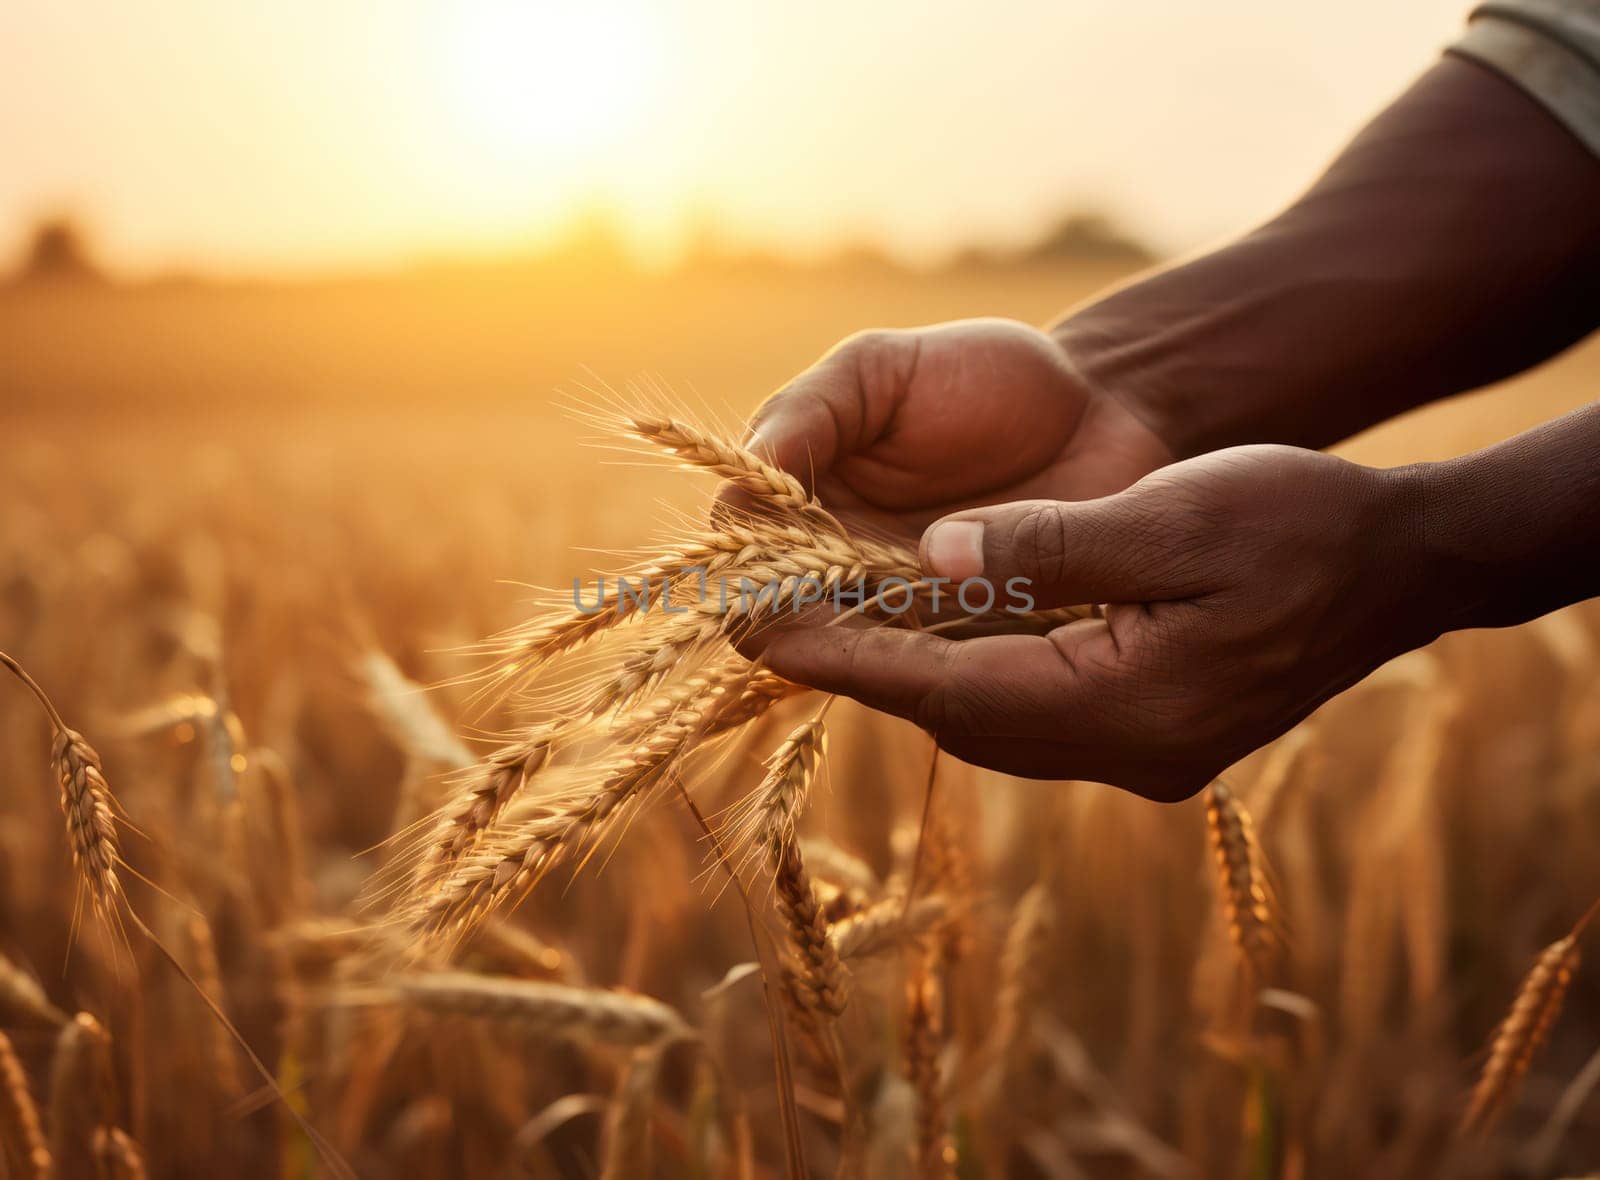 Golden Harvest: A Farmer's Hands Reaping Organic Rye in the Autumn Field under a Vibrant Sunset Sky